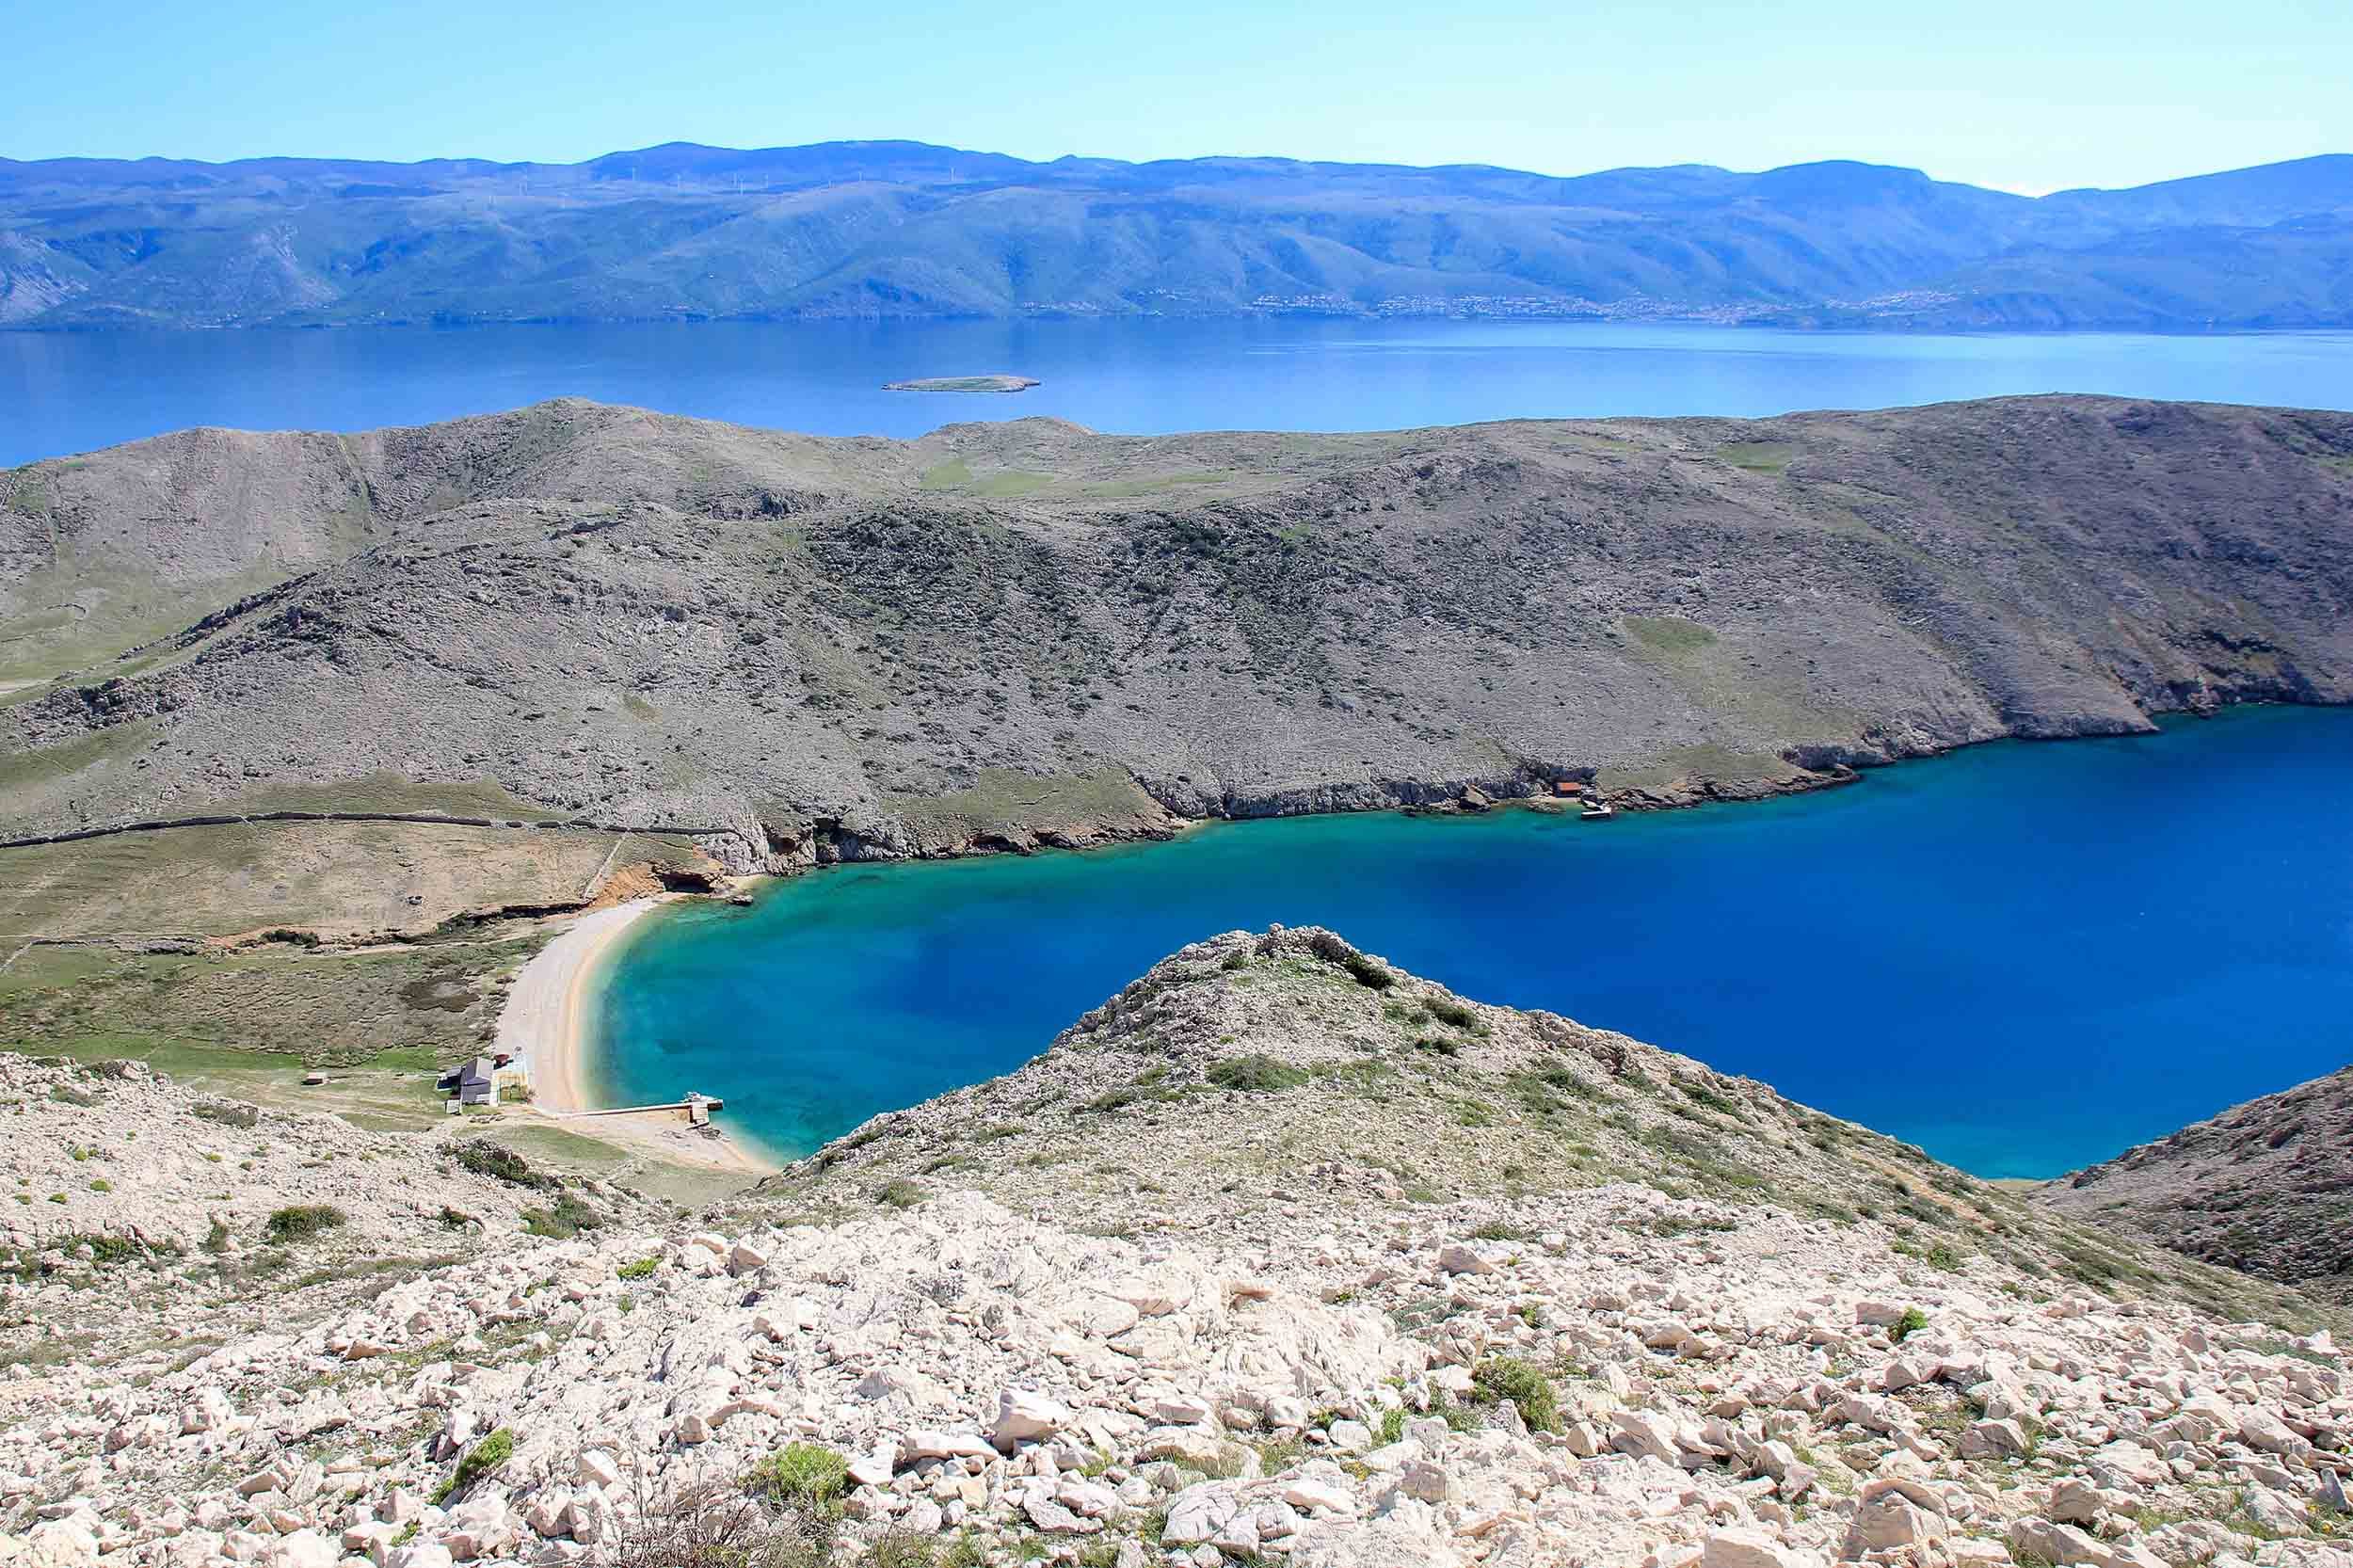 In Croatia, a blue lake is seen from the top of a mountain in spring.